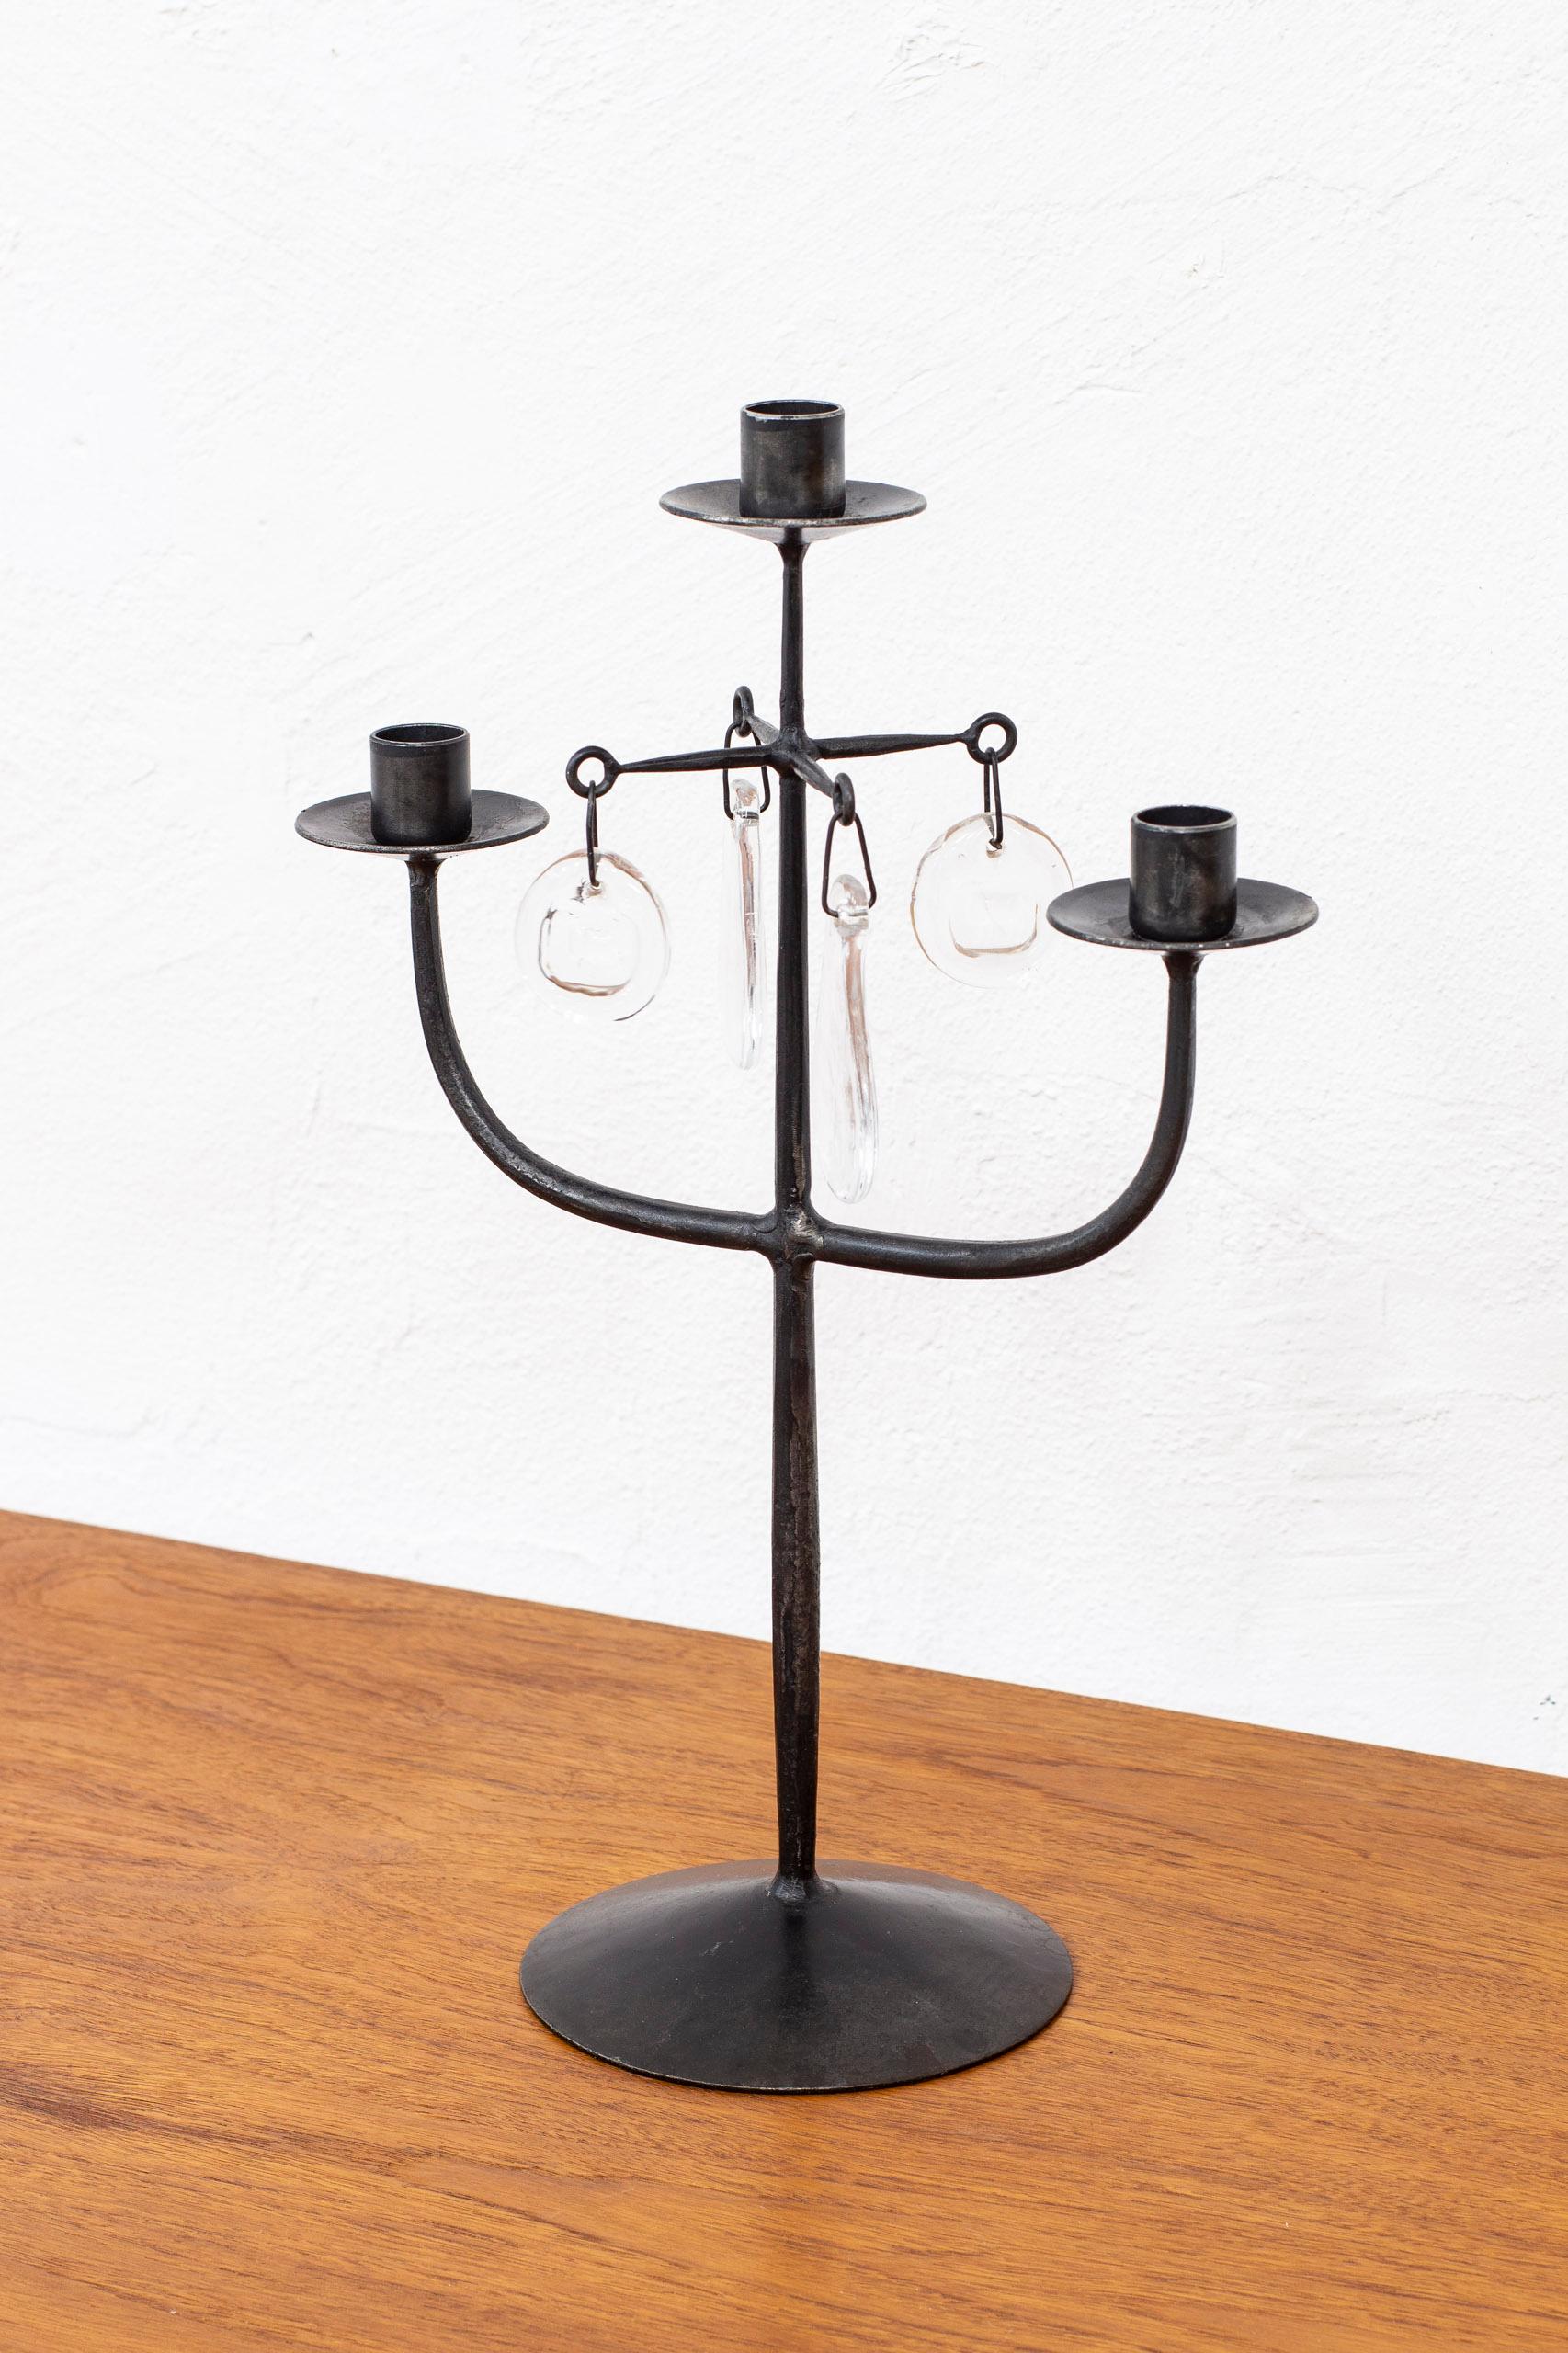 Mid-20th Century Candelabras in Forged Iron and Glass by Erik Höglund for Boda, Sweden, 1950s